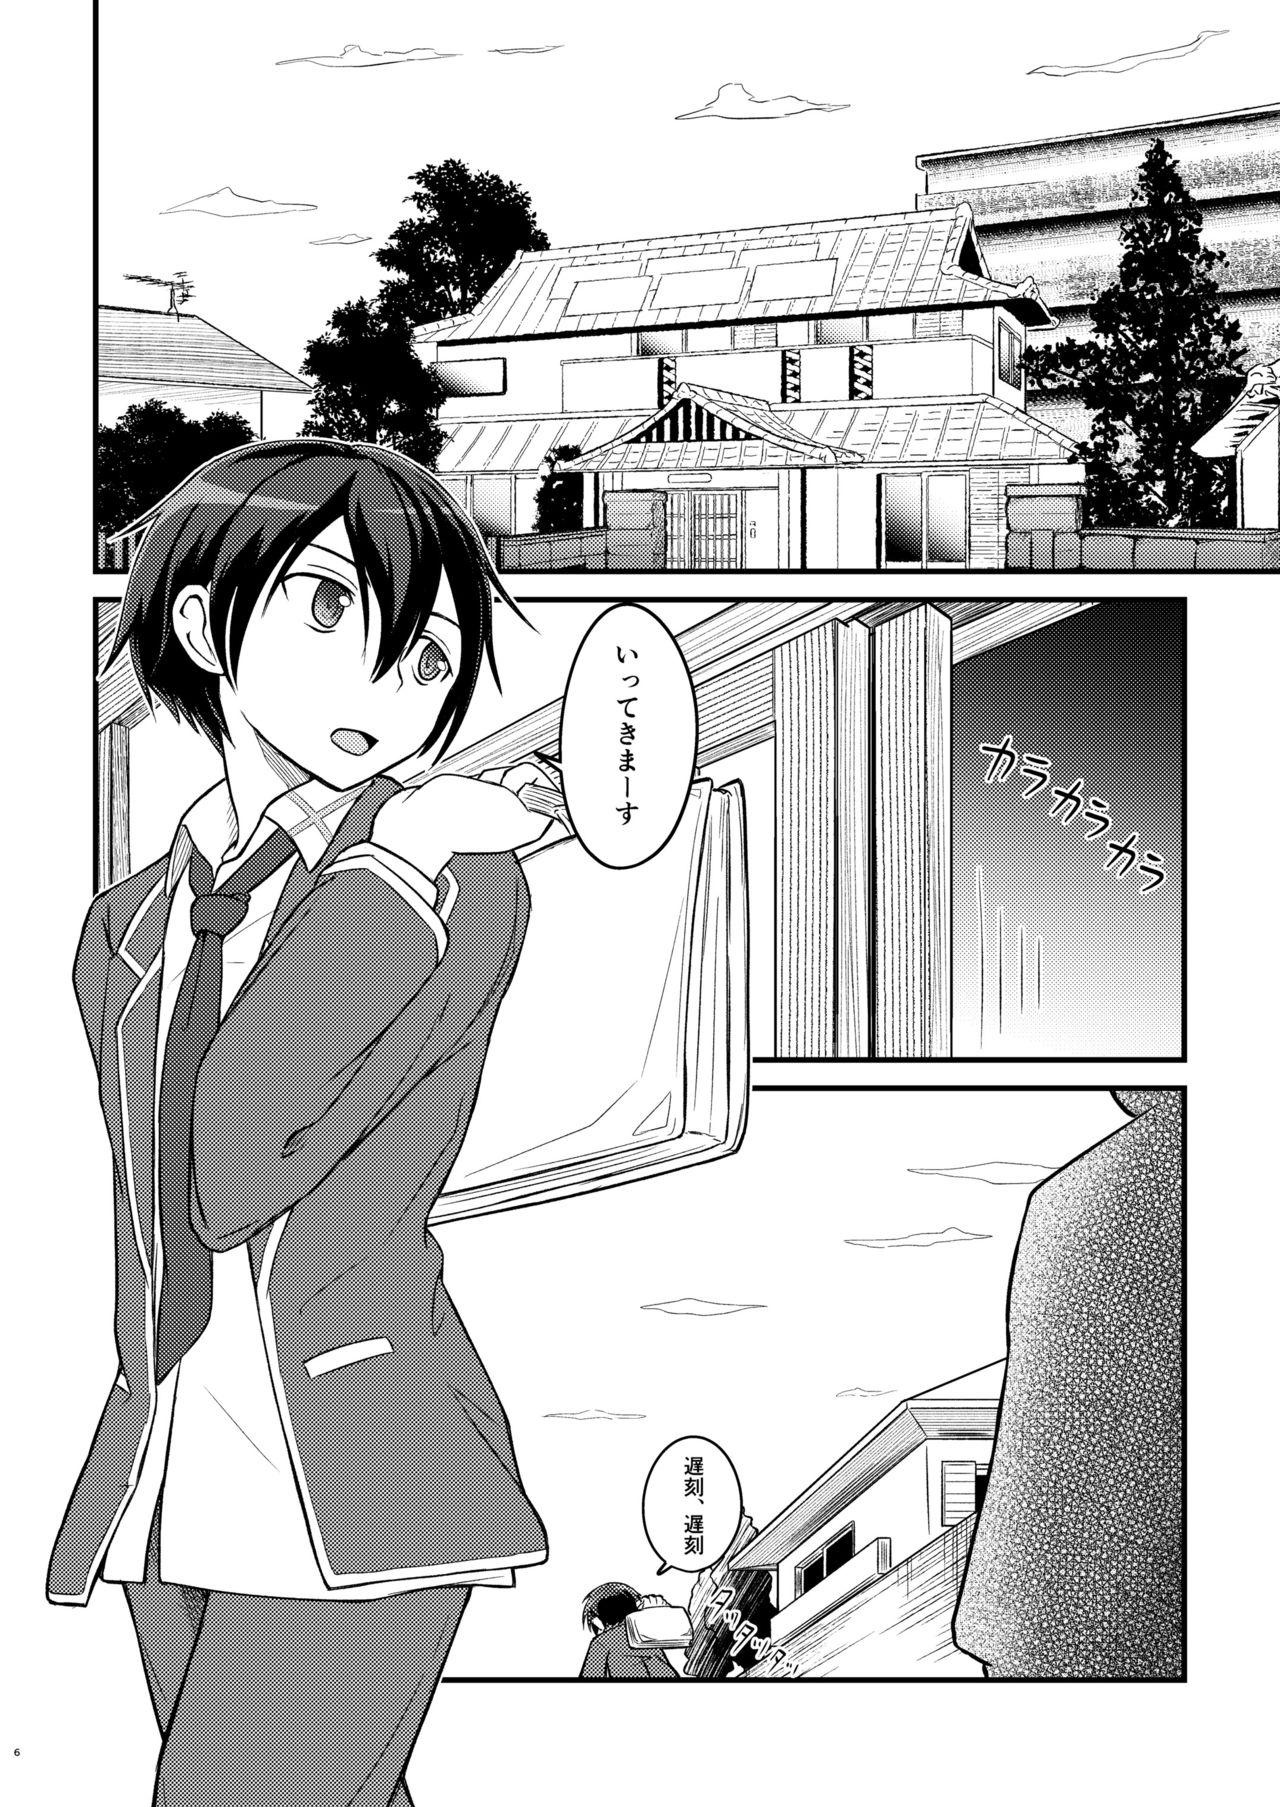 Officesex Kiriko Route Another A Part Set - Sword art online Humiliation Pov - Page 5